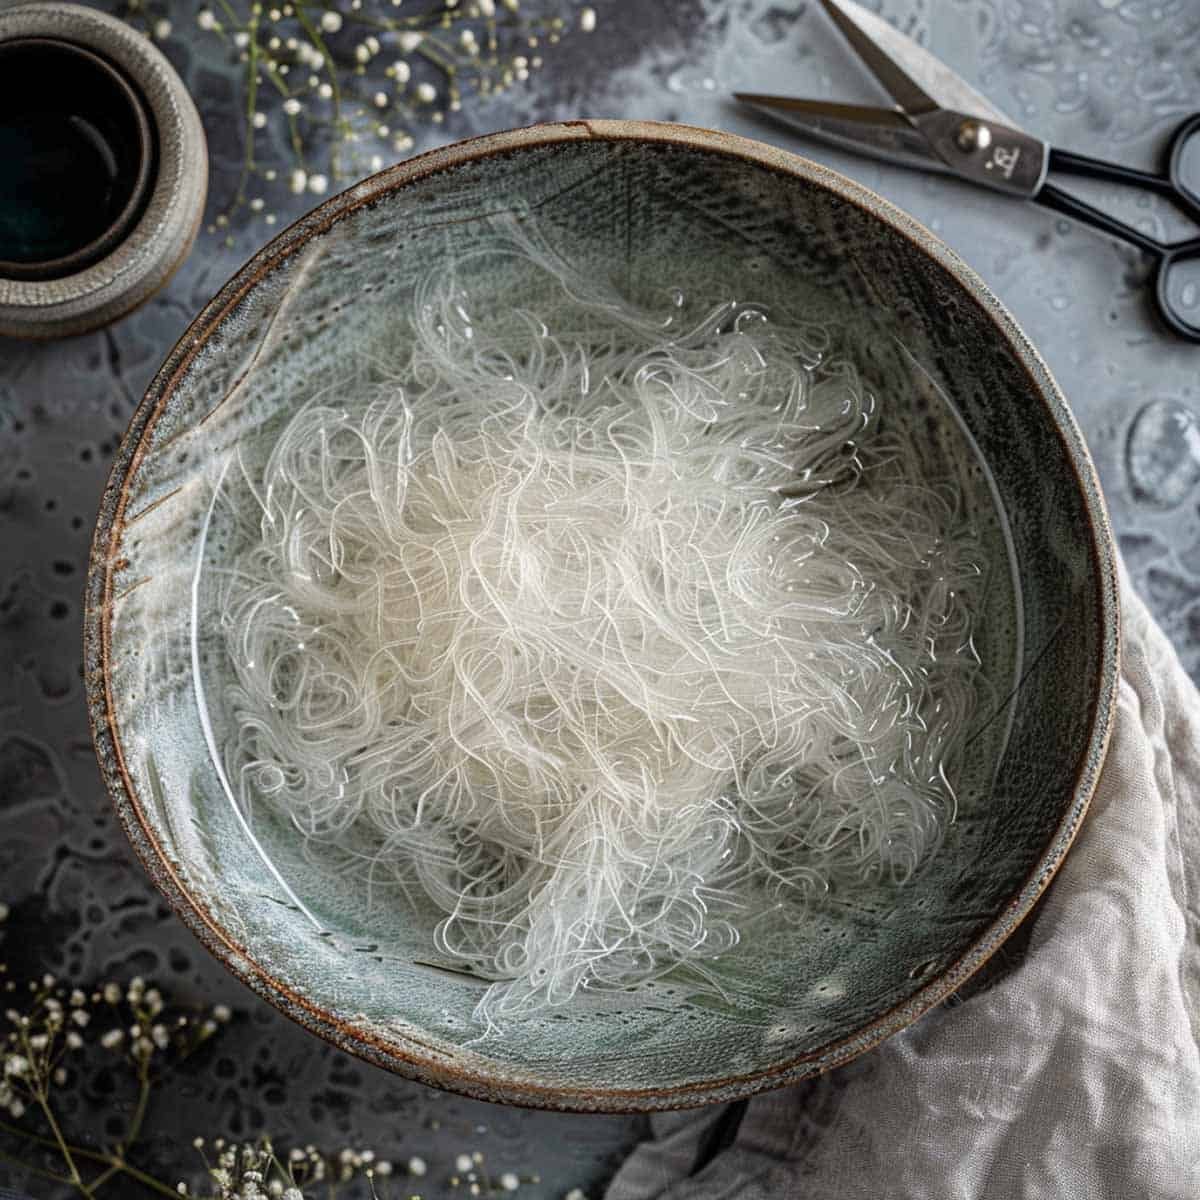 Glass noodles soaking in a bowl of warm water, softening for a tasty recipe